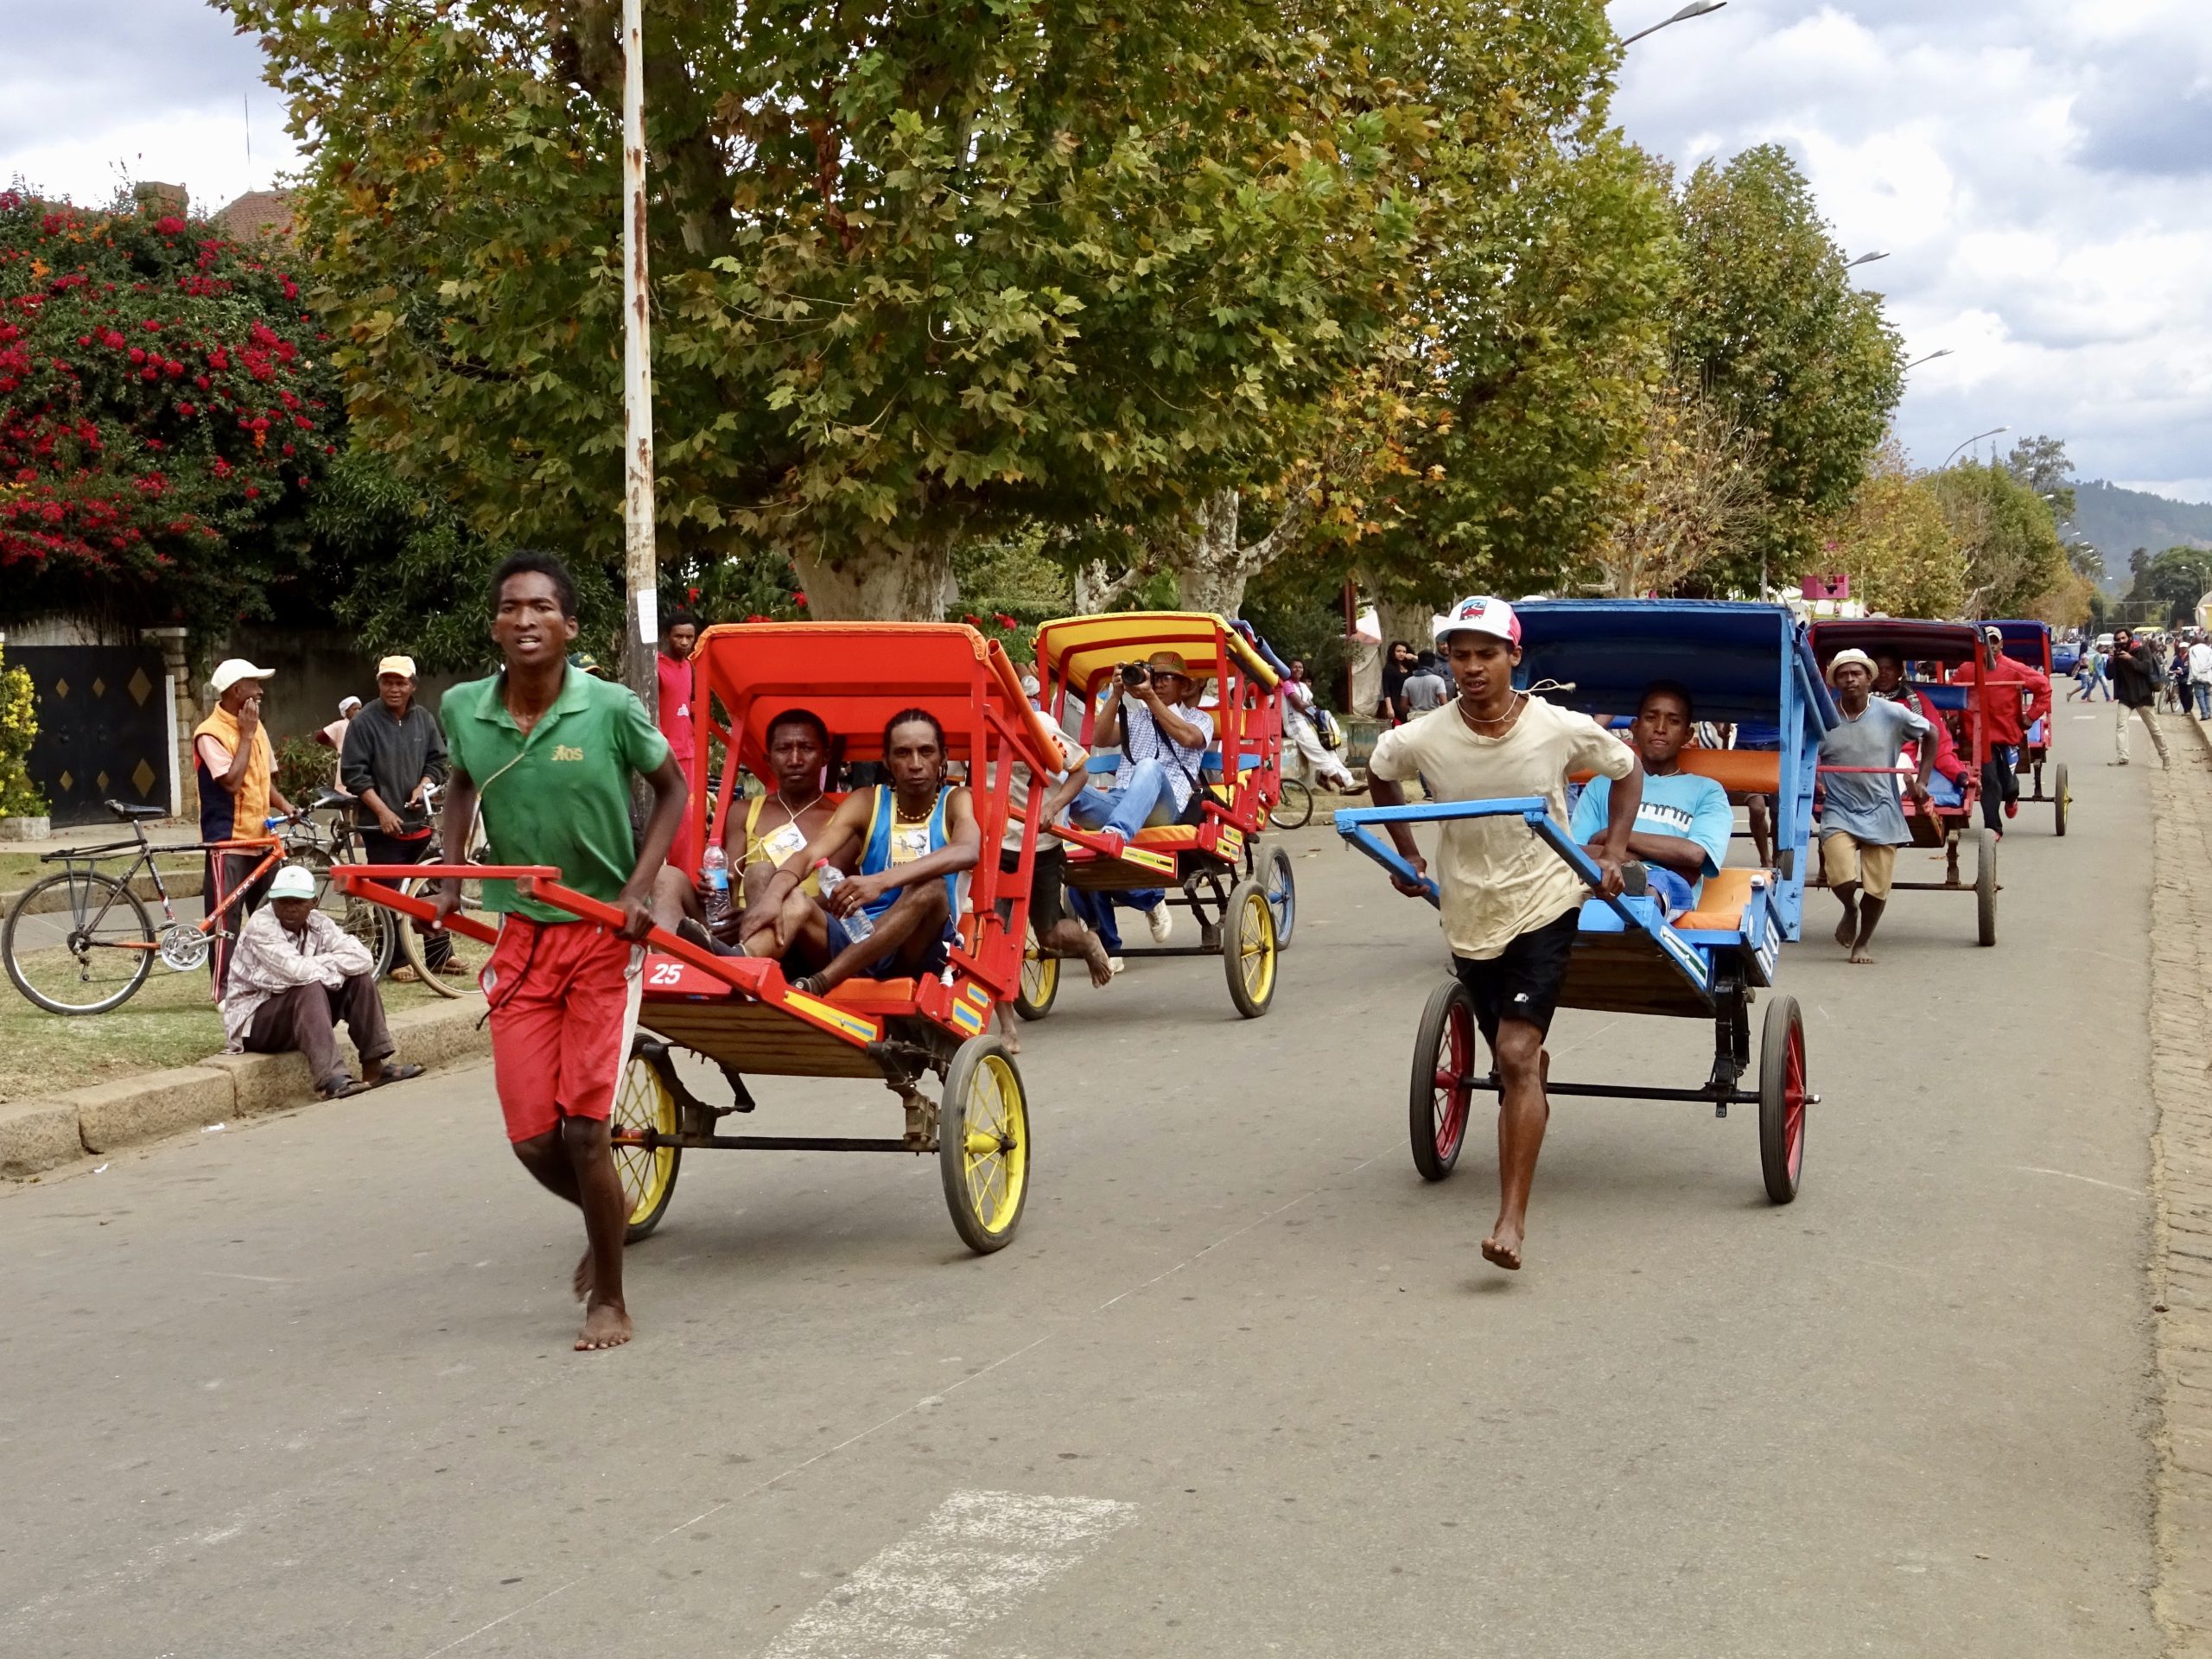 Pousse pousse taxi's in Antsirabe